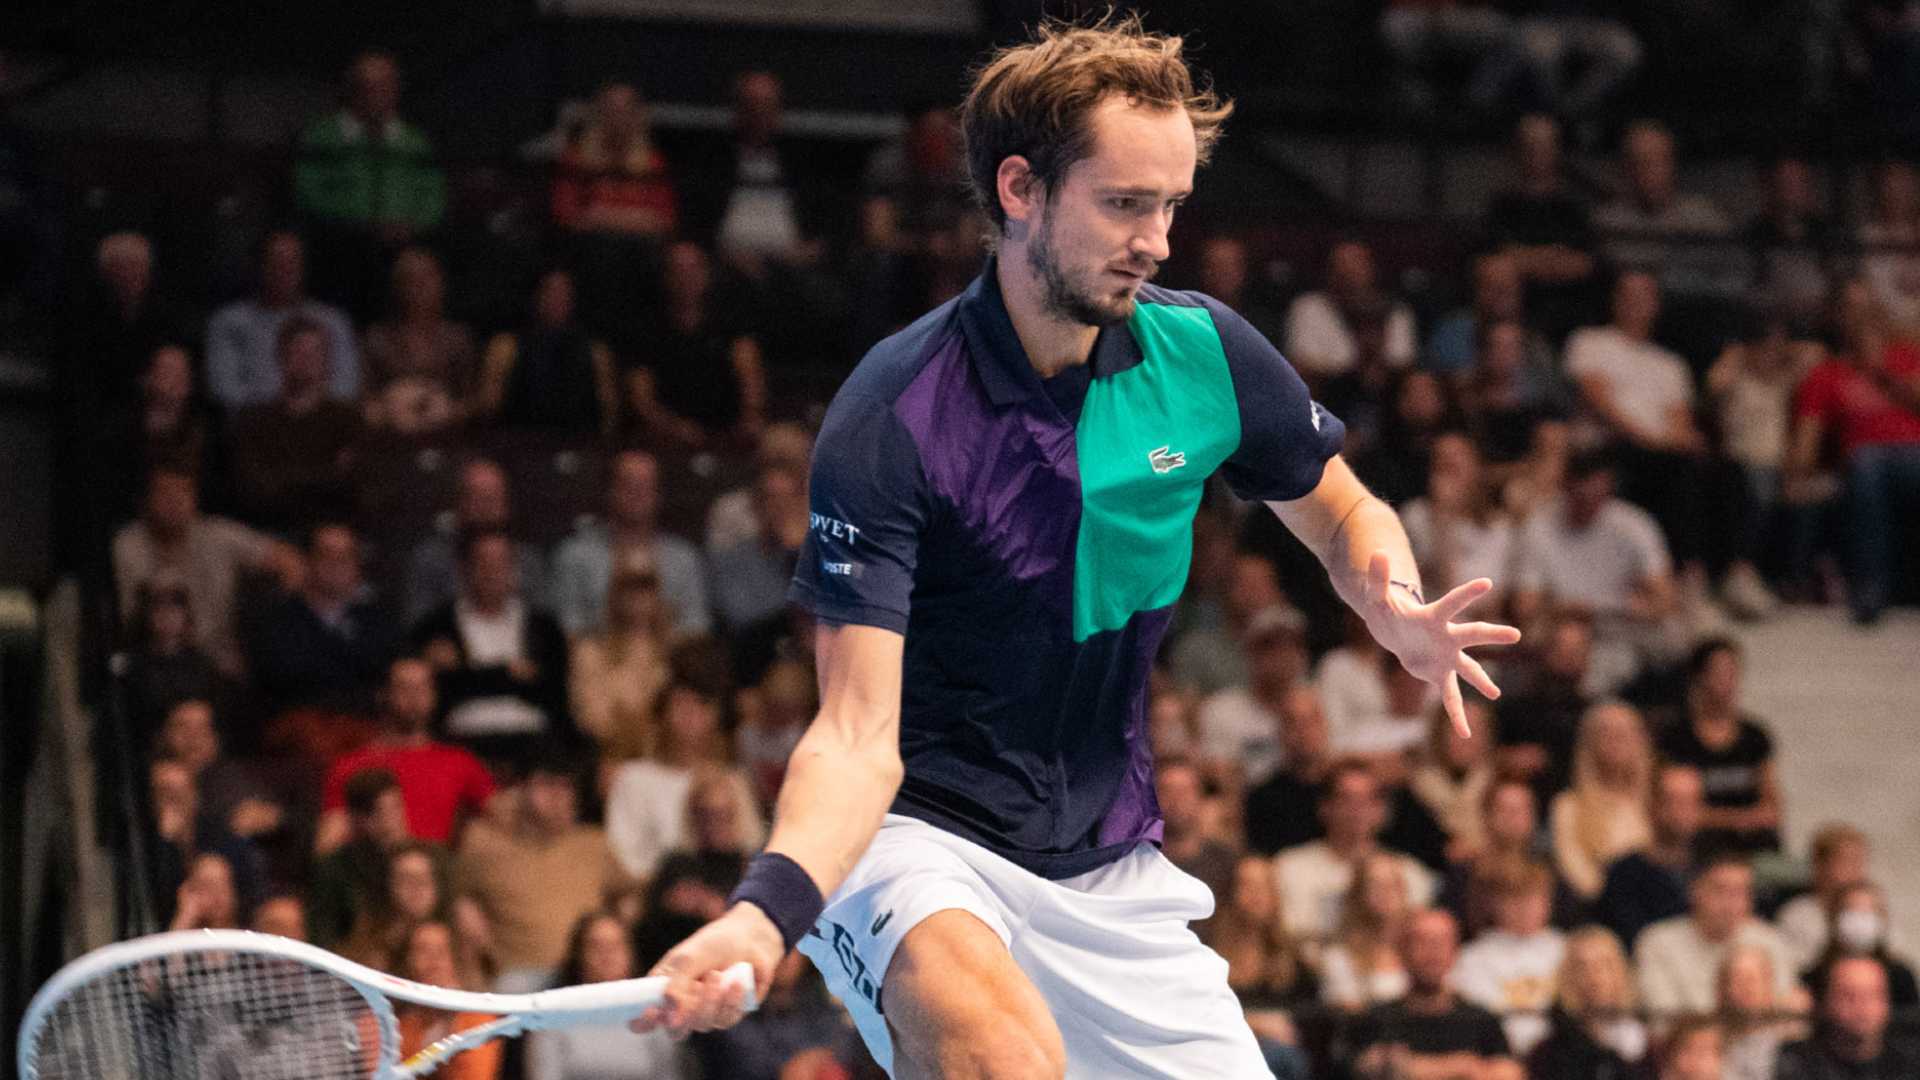 Daniil Medvedev earns his 30th hard-court win of the season in the Vienna opening round.